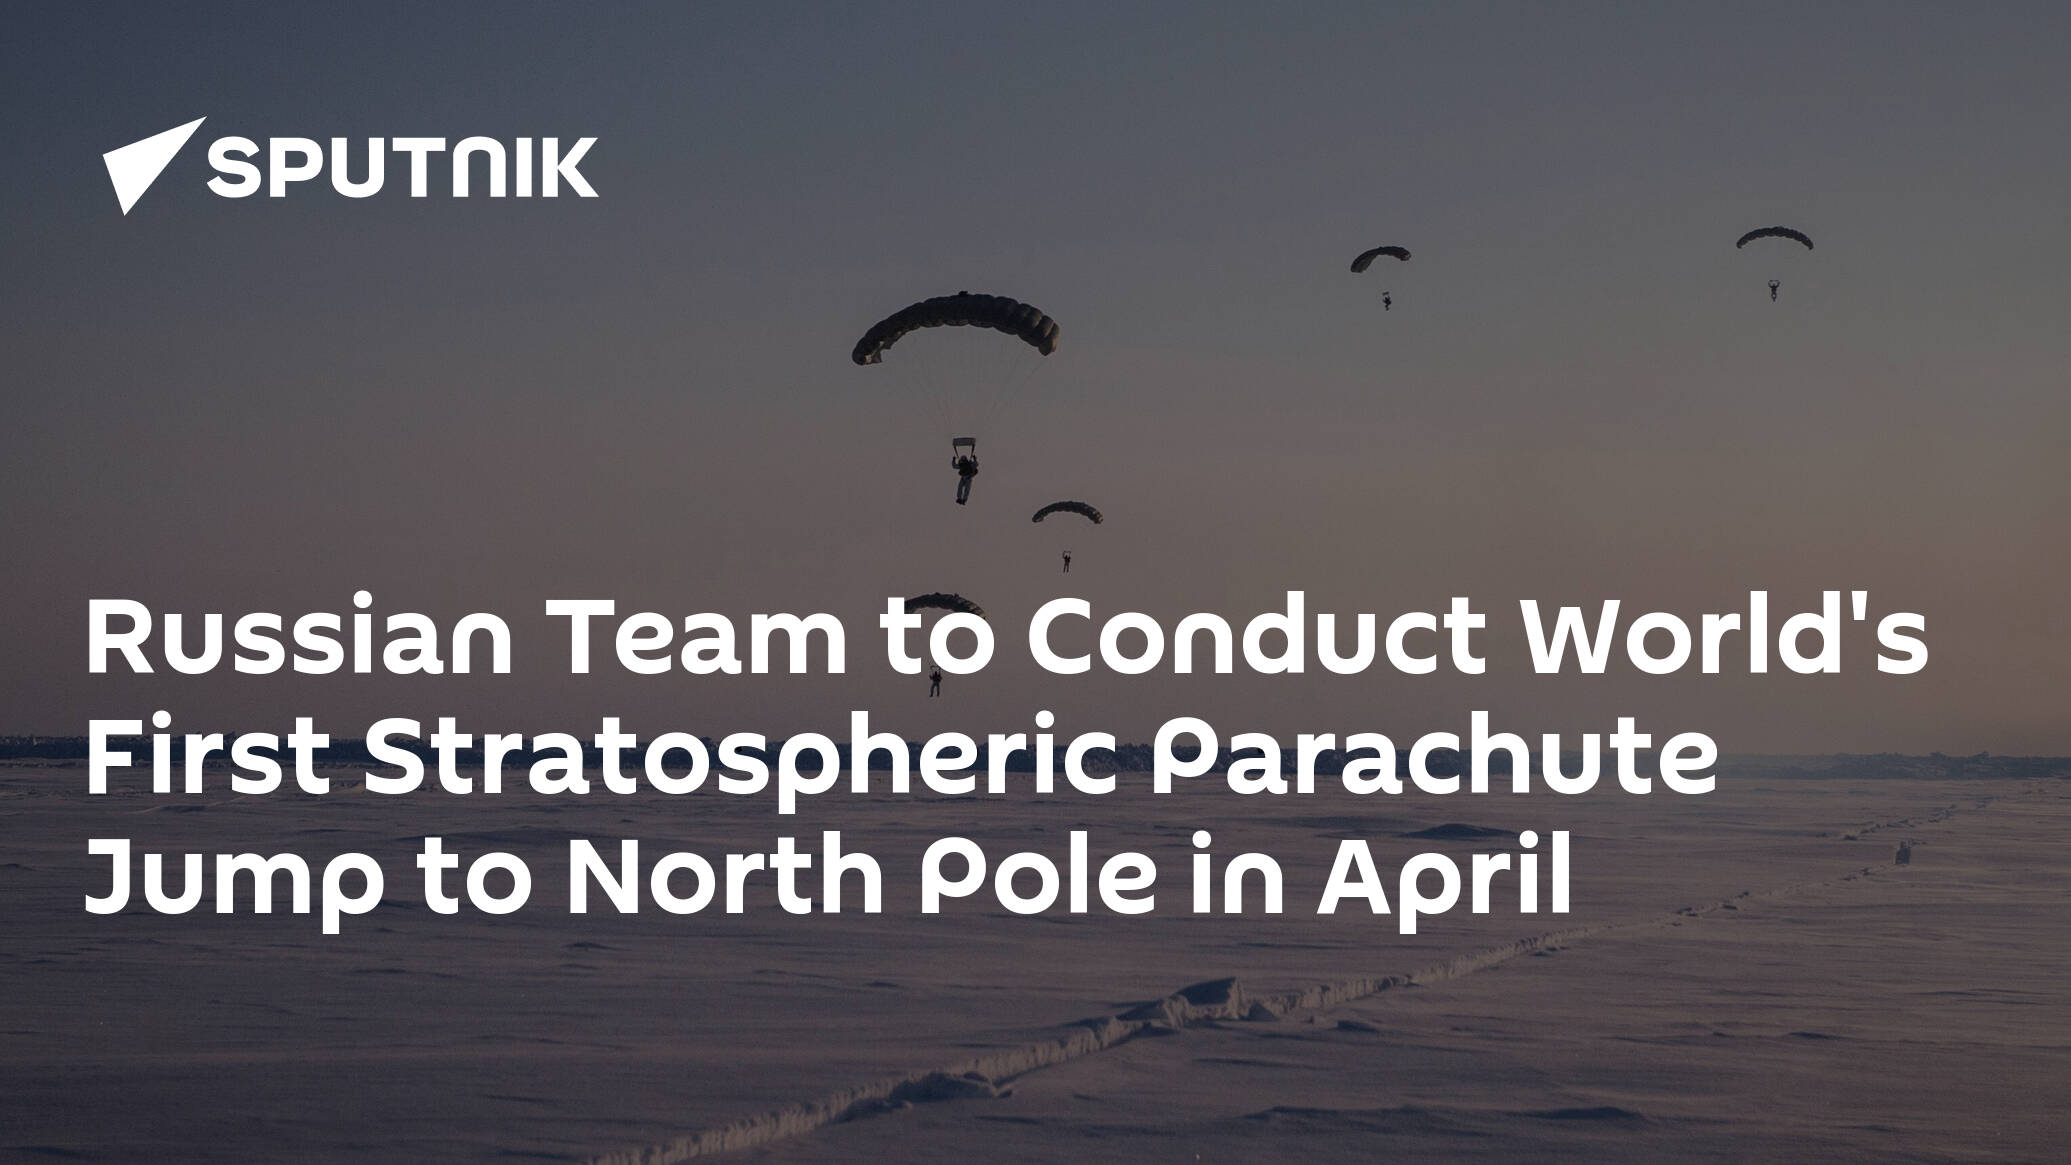 Russian Team to Conduct World's First Stratospheric Parachute Jump to